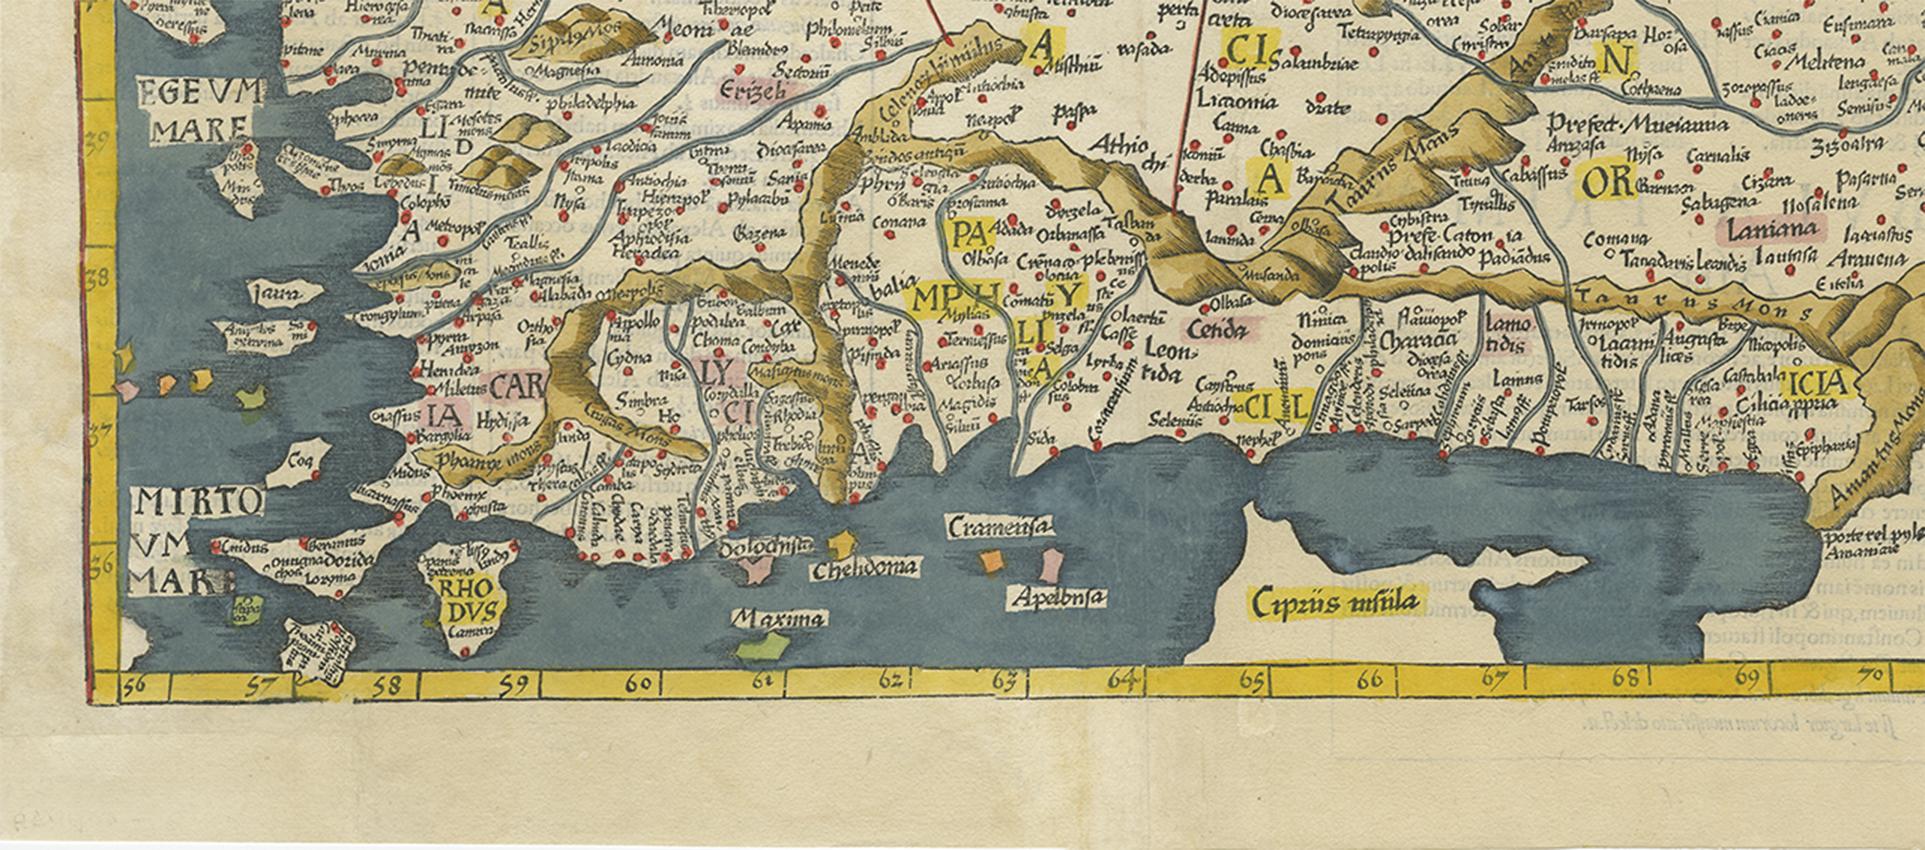 Paper Antique Map of Turkey by C. Ptolomey, circa 1541